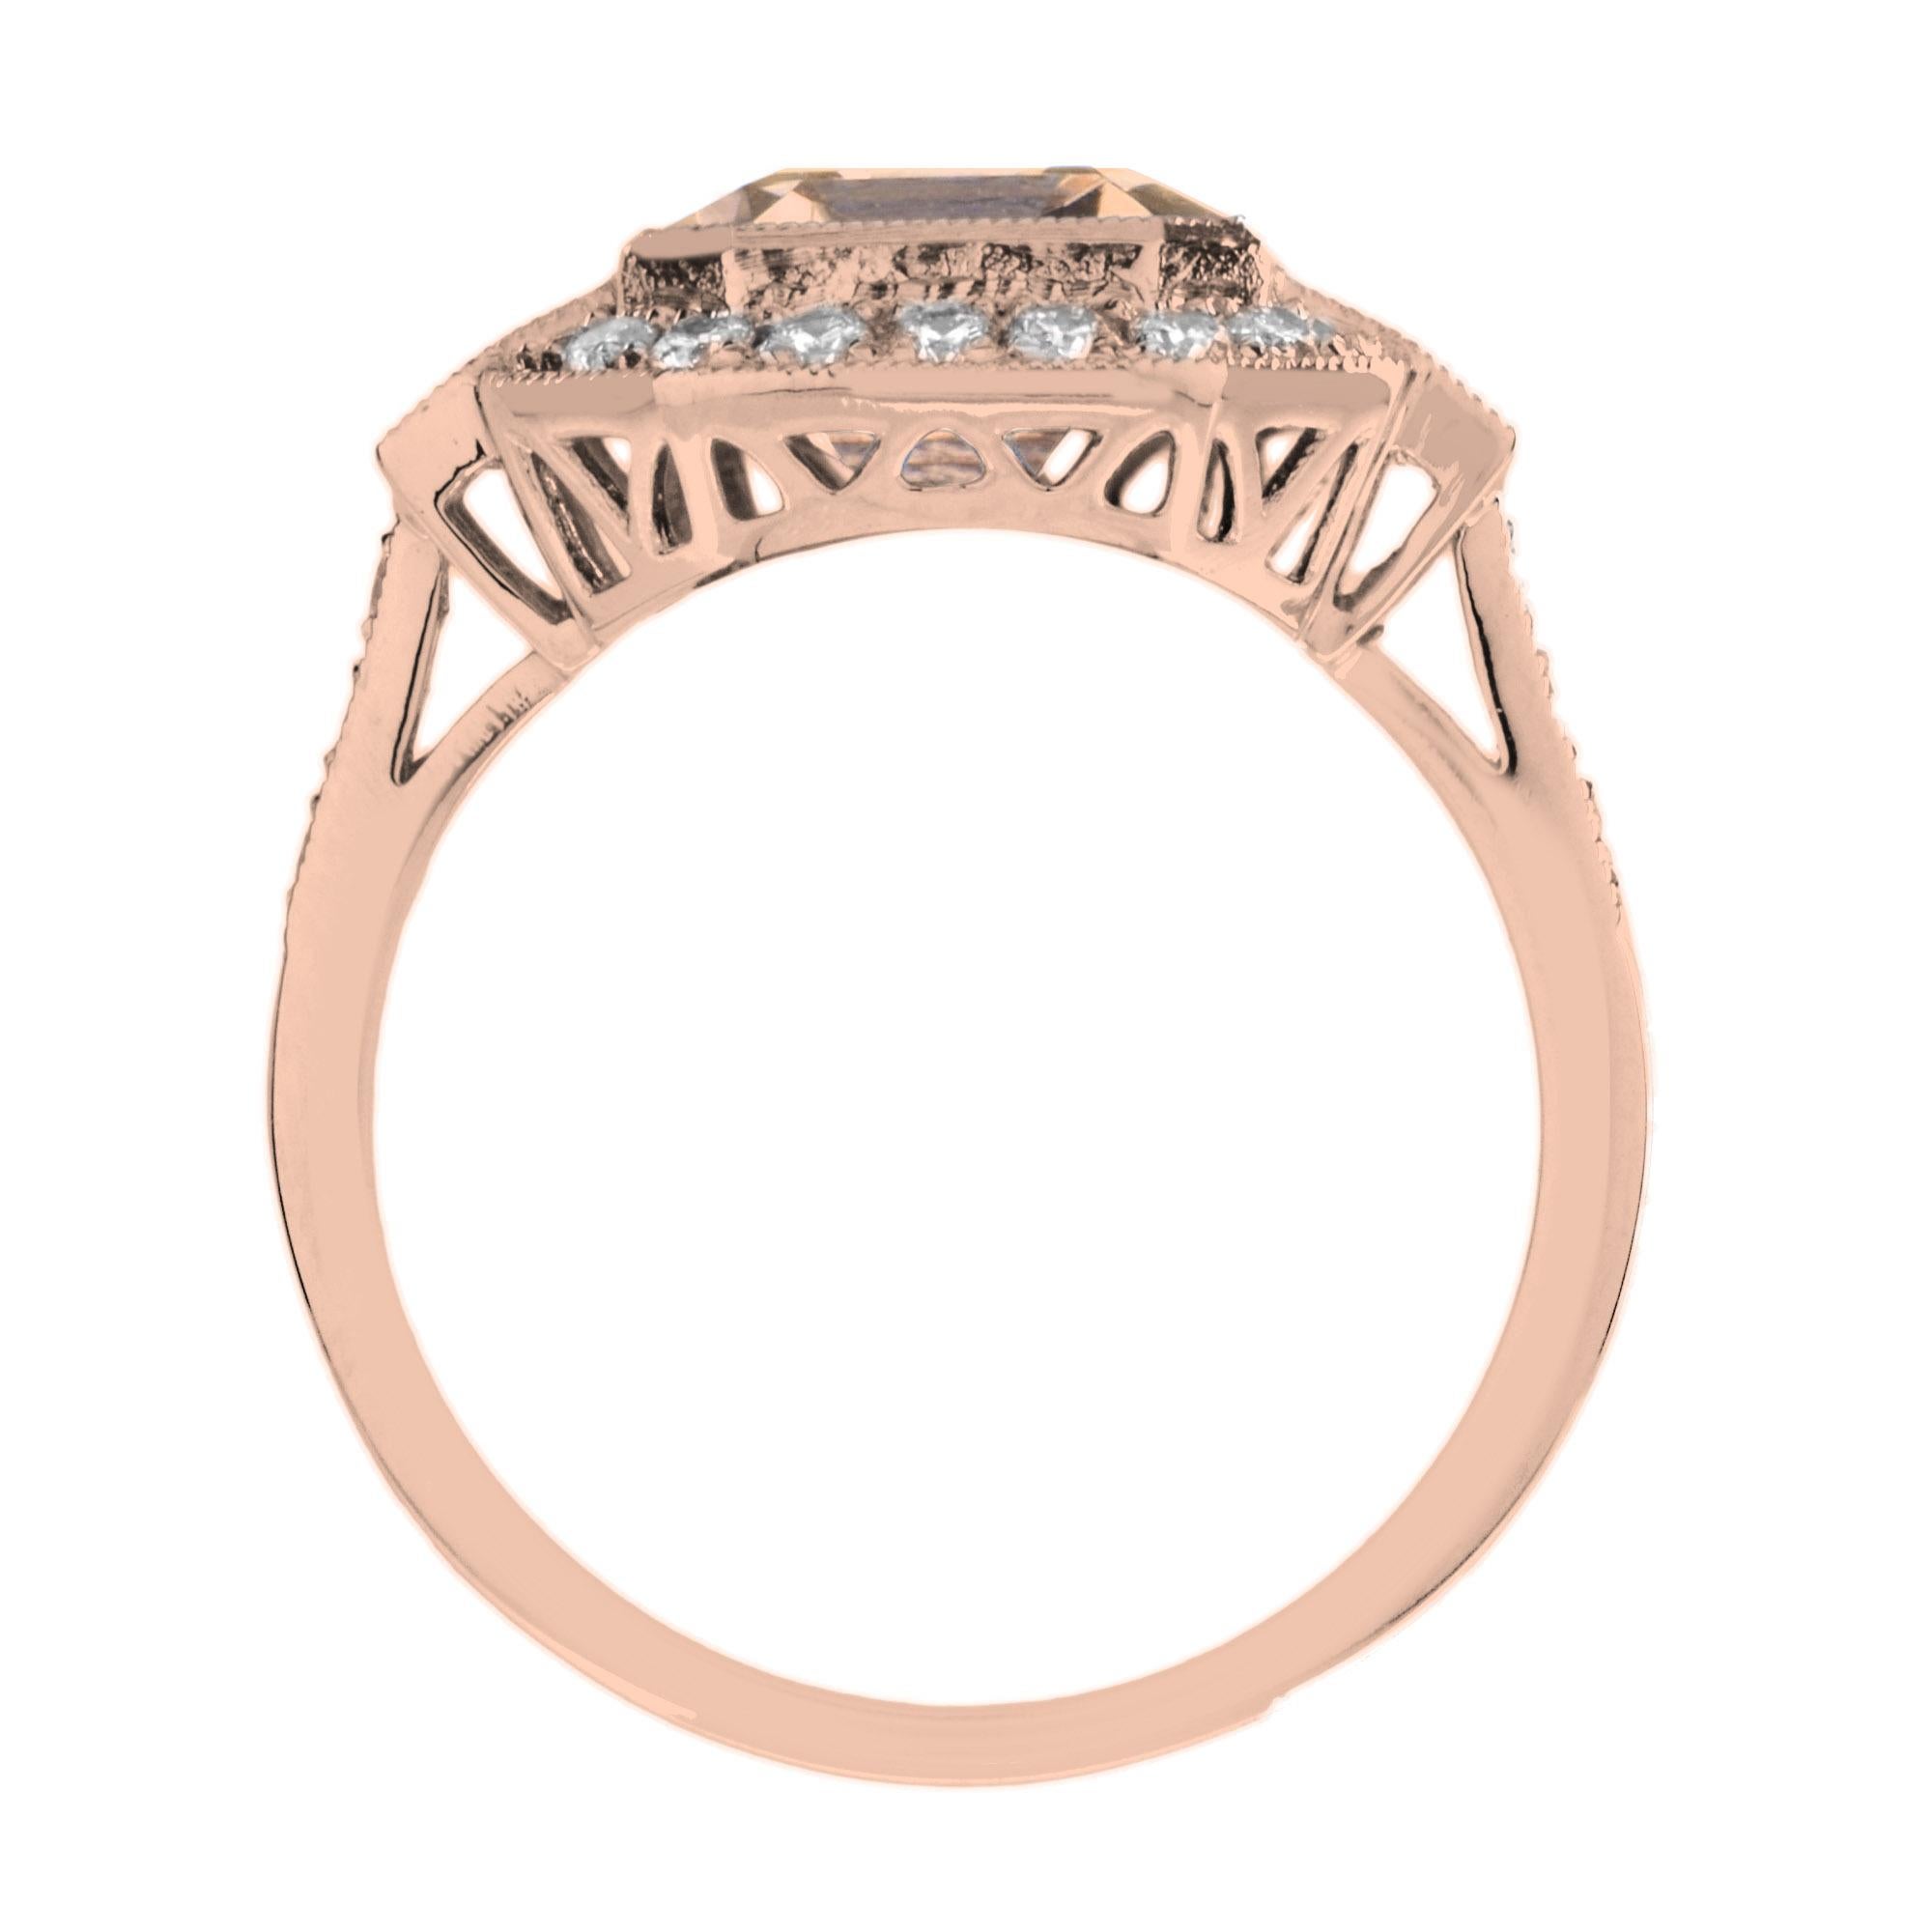 For Sale:  Emerald Cut Morganite and Diamond Engagement Ring in 18K Rose Gold 6